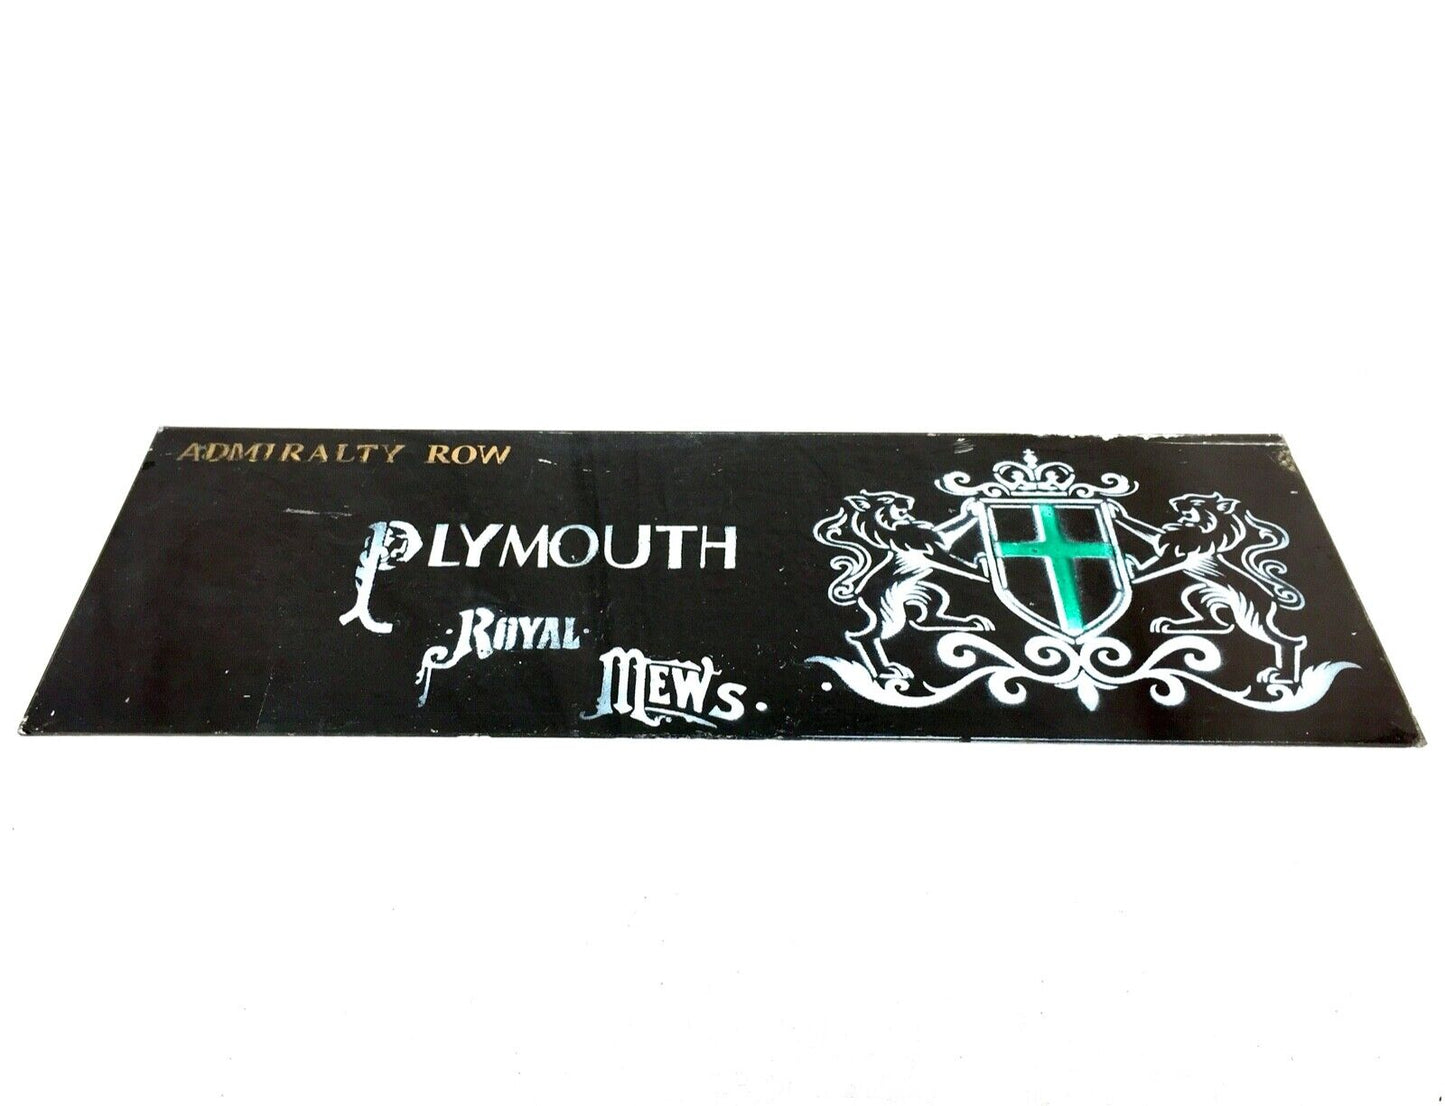 Antique Advertising - 1935 Plymouth Admiralty Row Royal News Salvaged Glass Sign